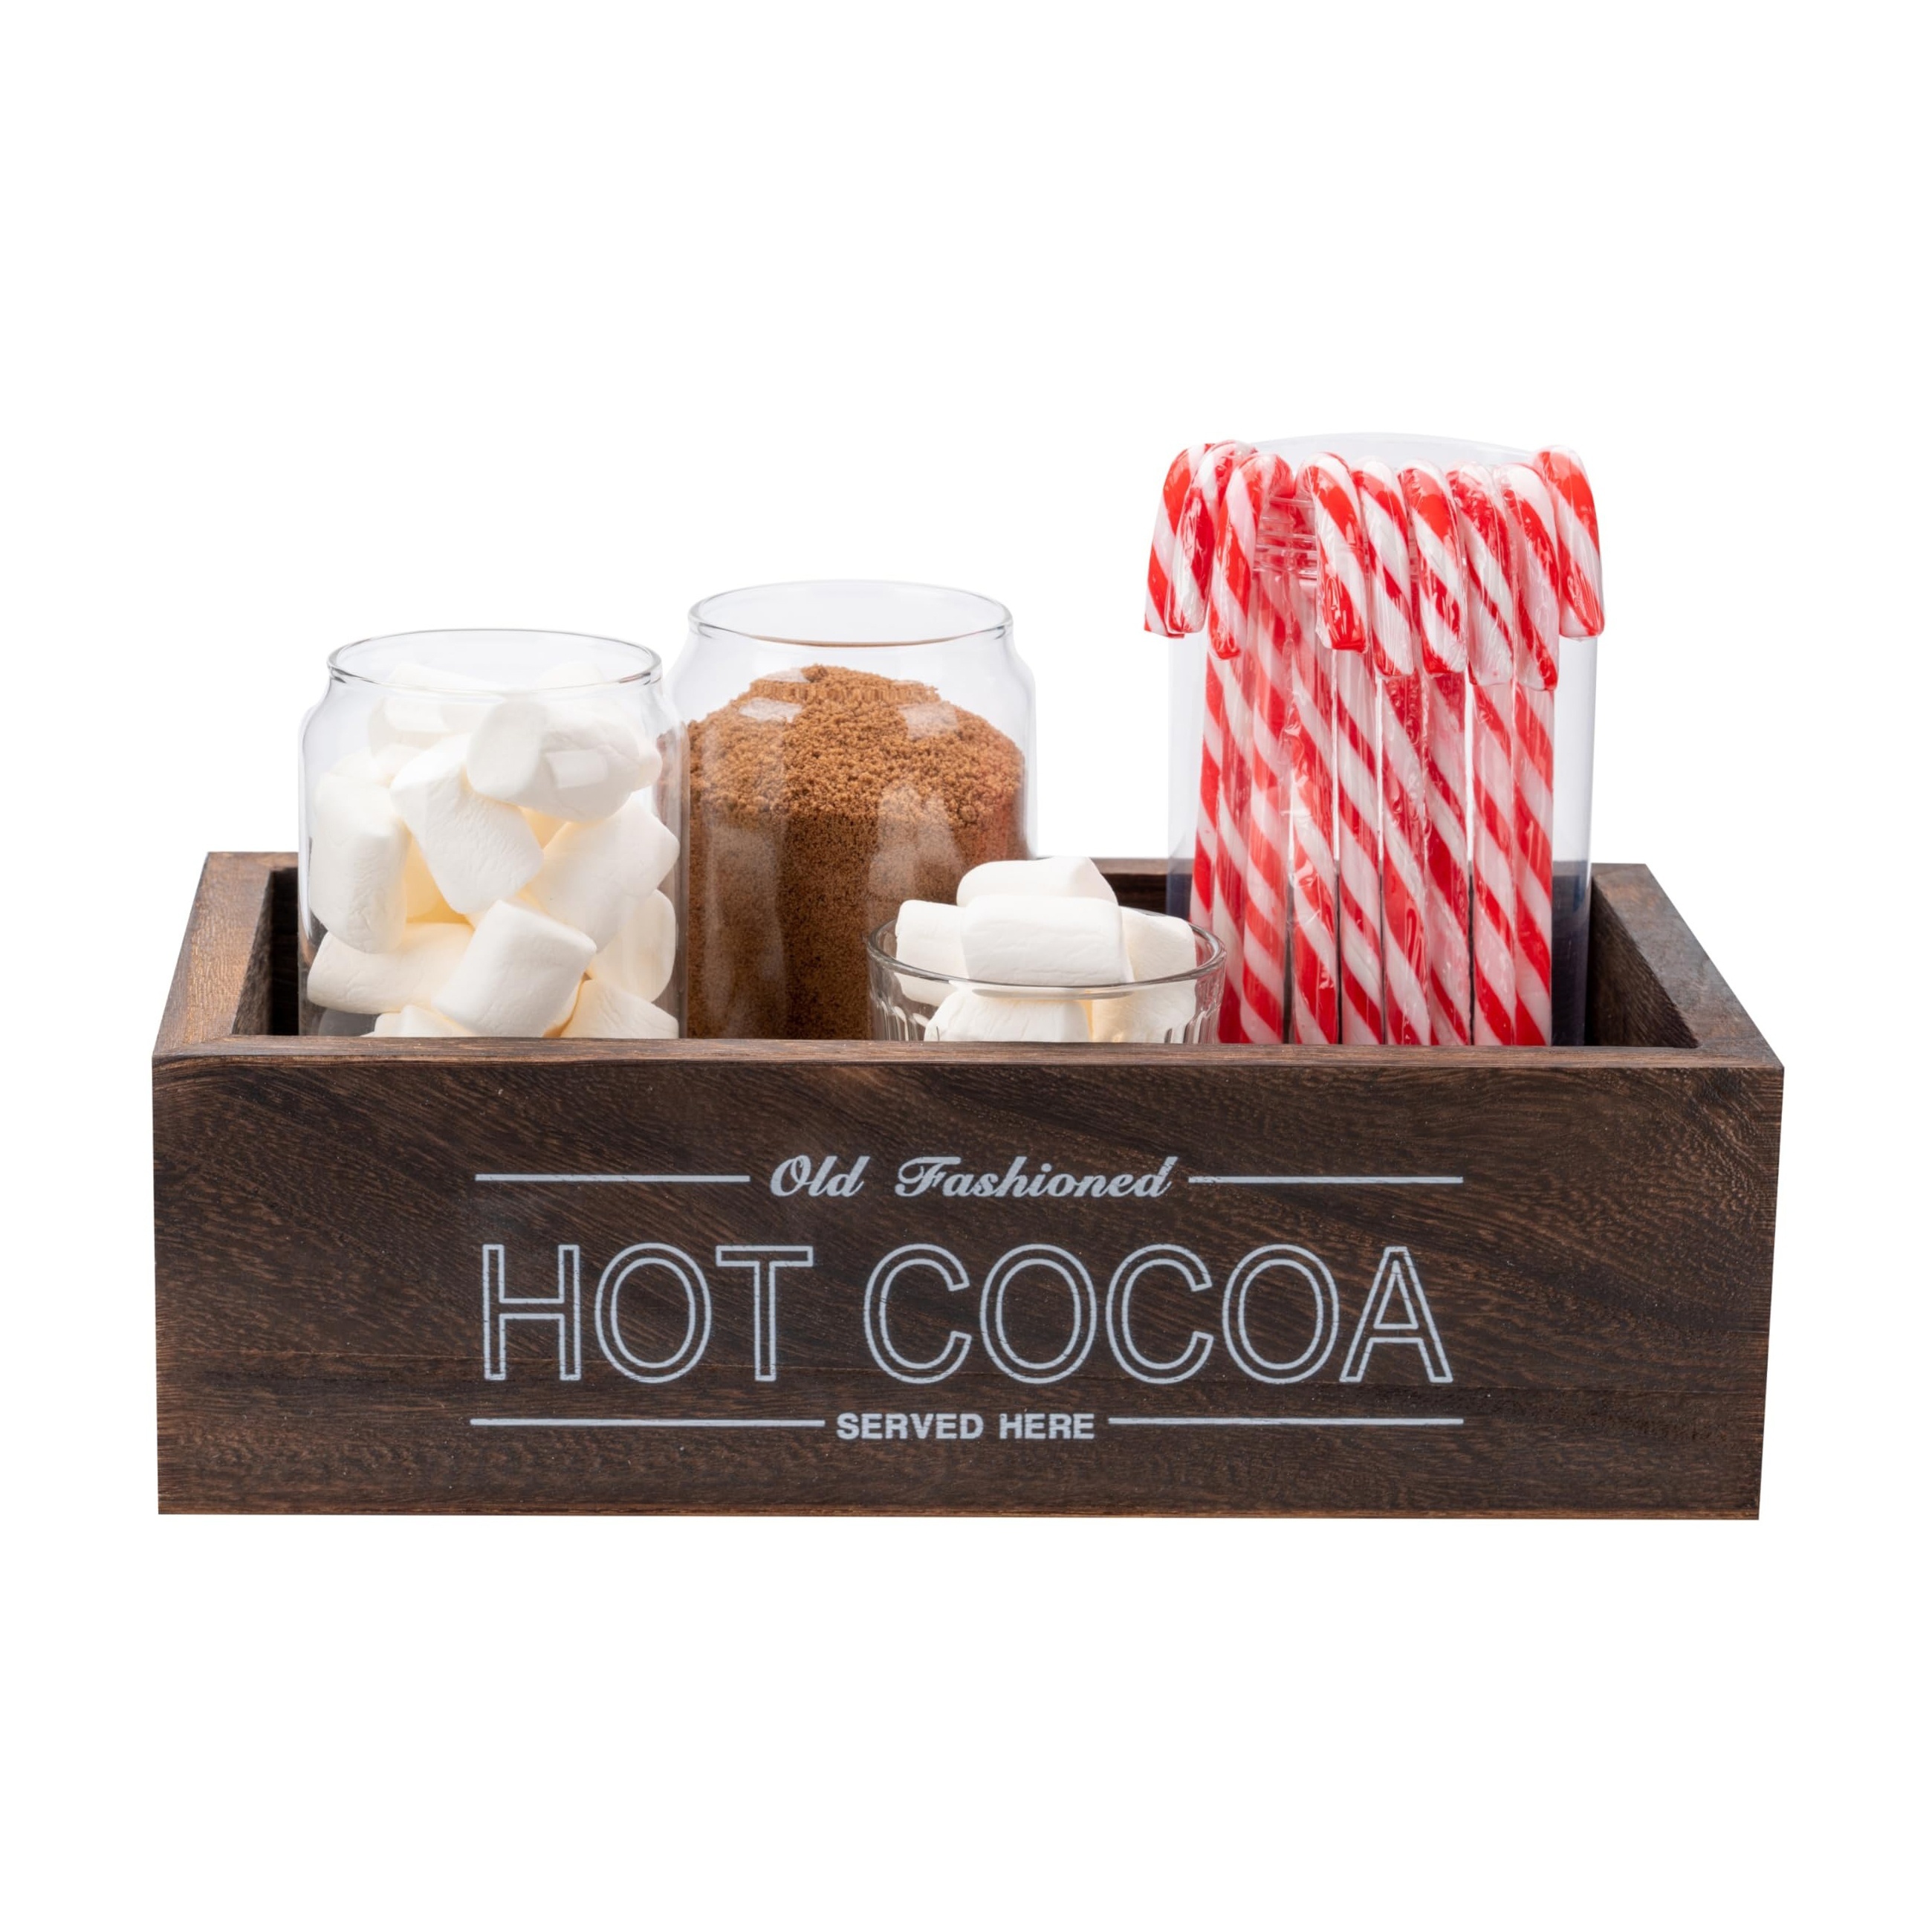 1pc Hot Cocoa Accessories Wooden Storage Box, Decorative Tray Holder For Home, Kitchen, Office, Farmhouse, Household Storage And Organization